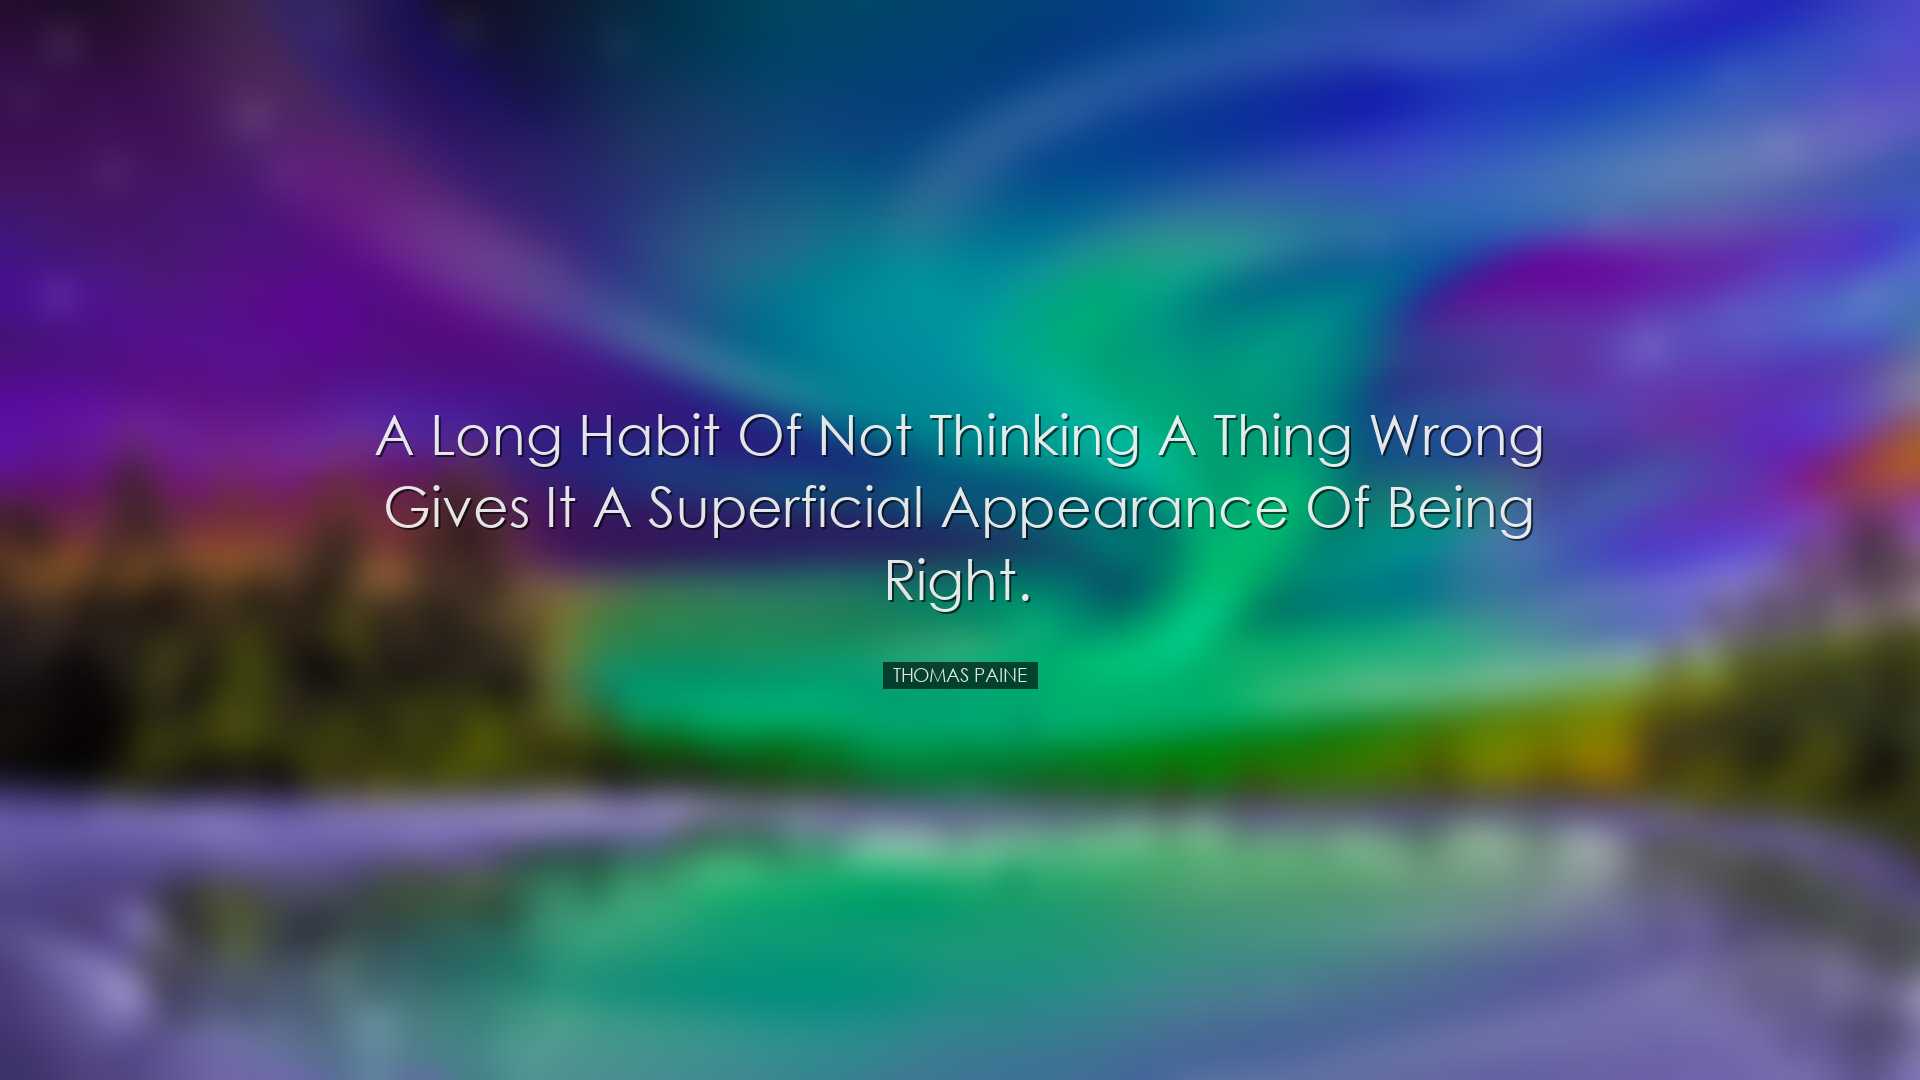 A long habit of not thinking a thing wrong gives it a superficial